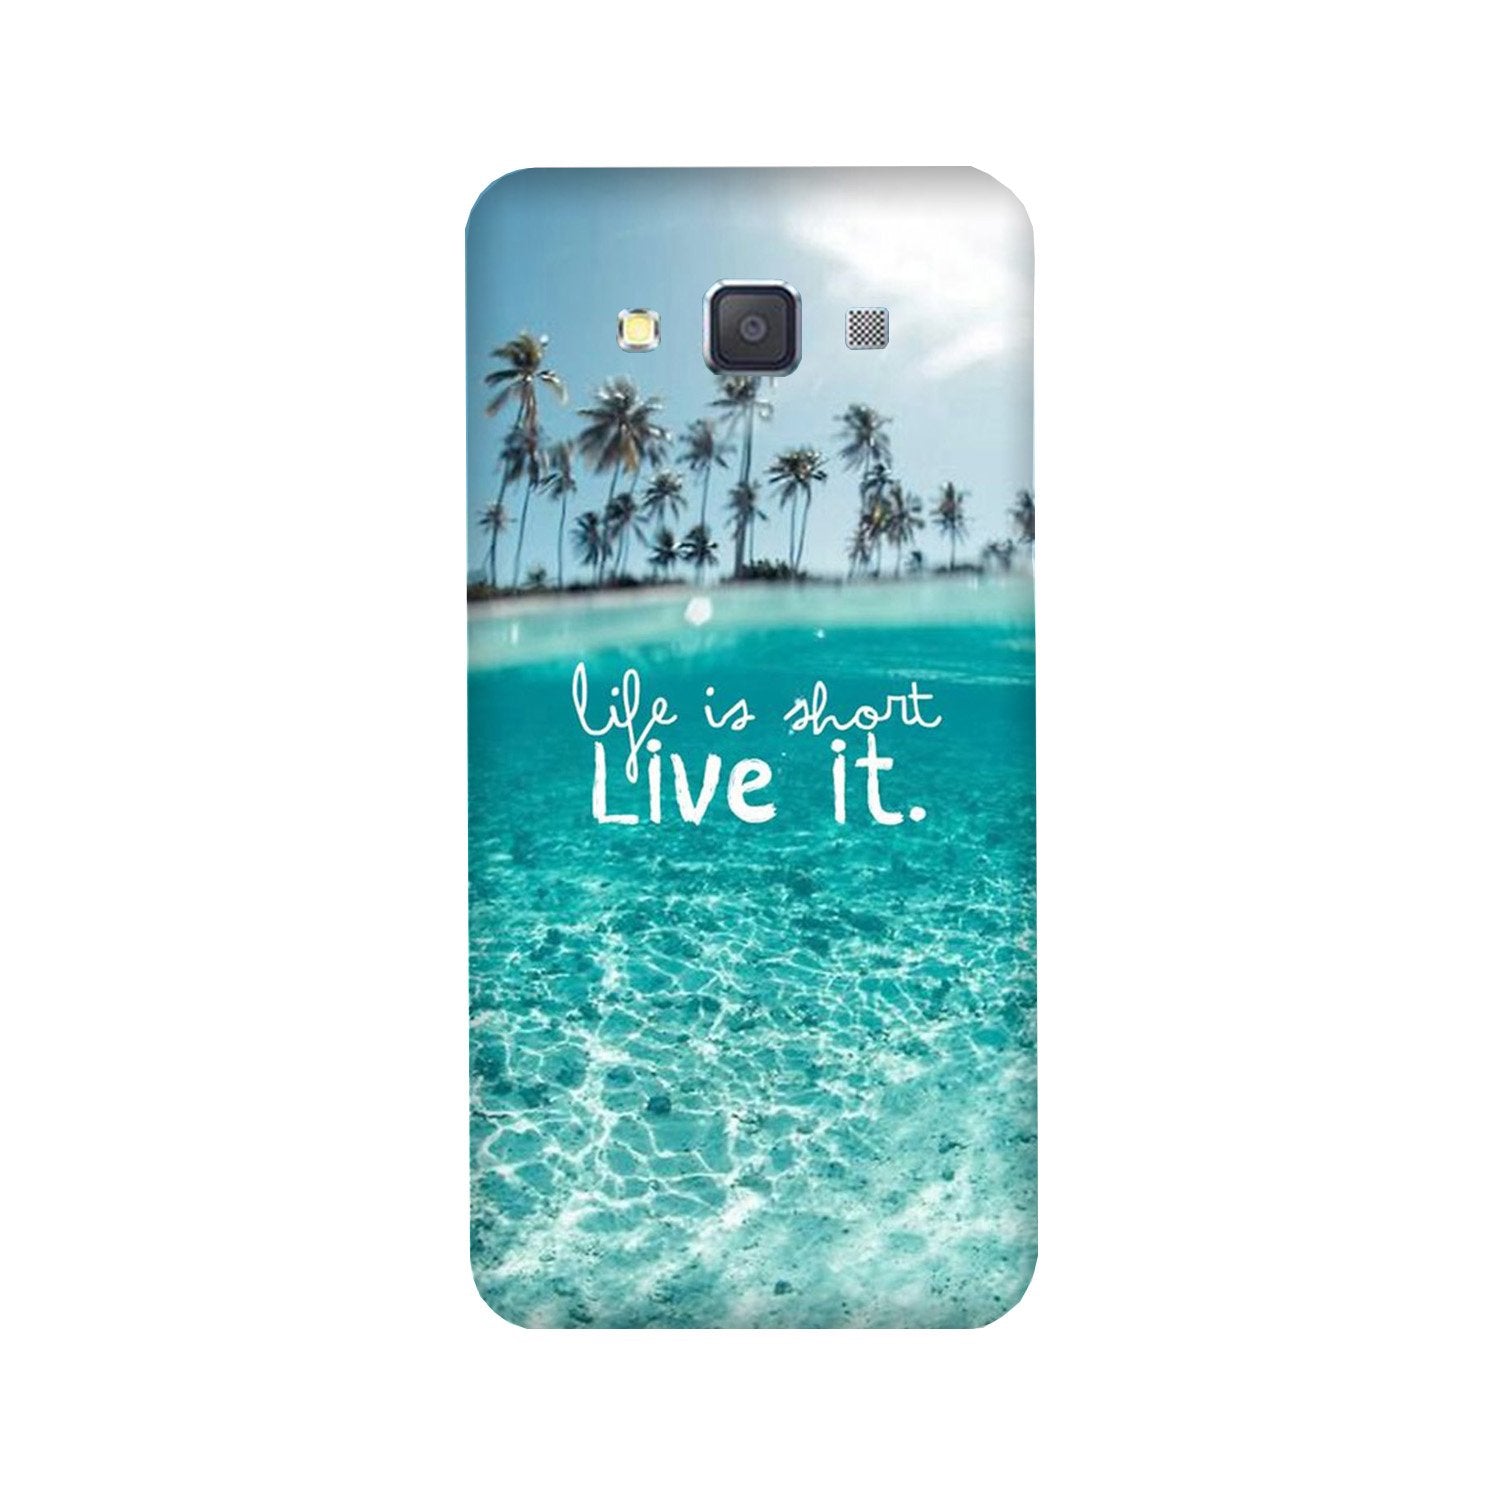 Life is short live it Case for Galaxy Grand 2